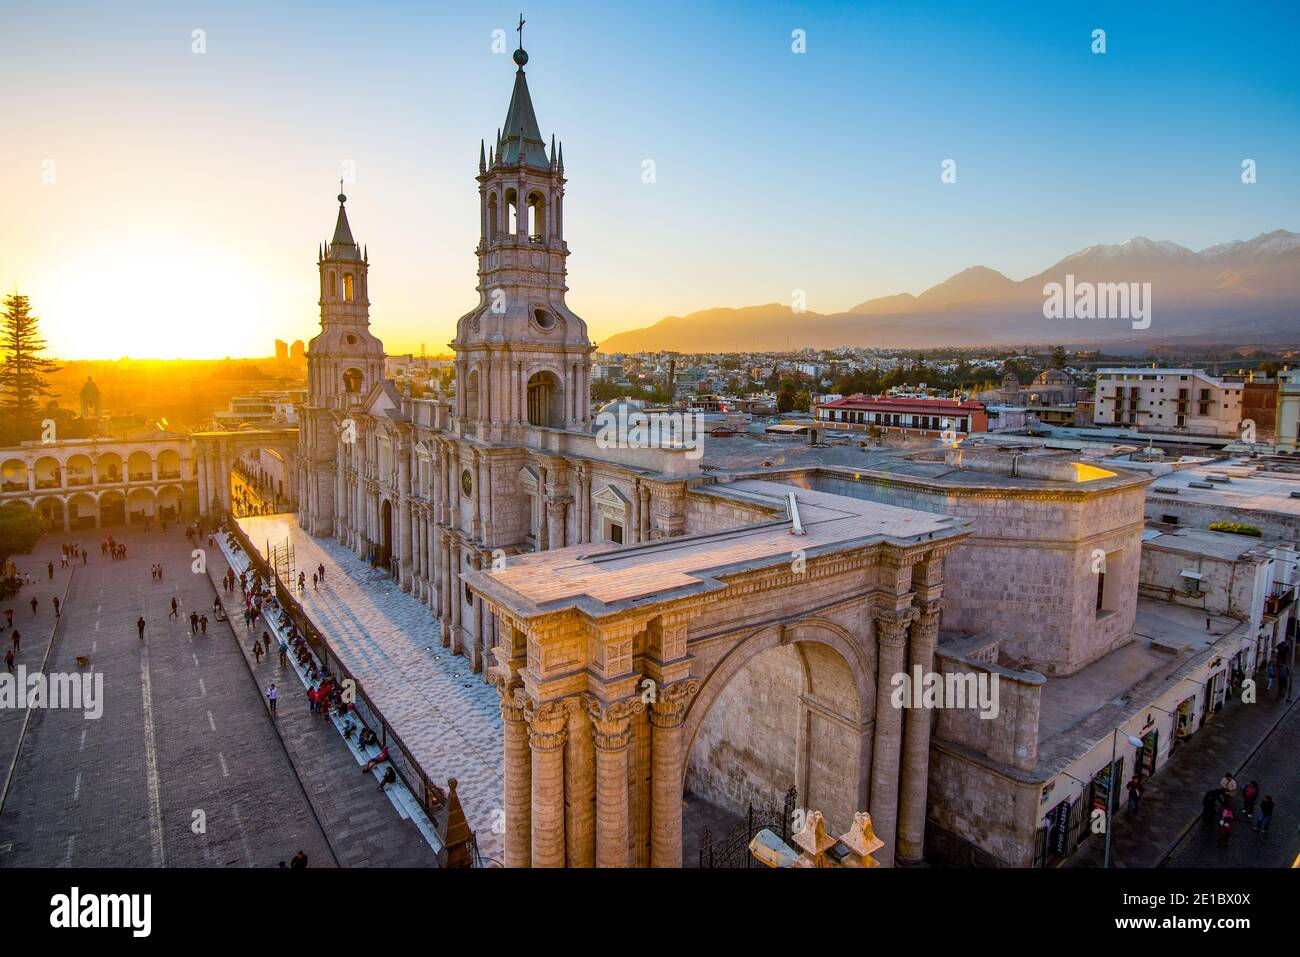 The Basilica Cathedral of Arequipa on sunset Stock Photo